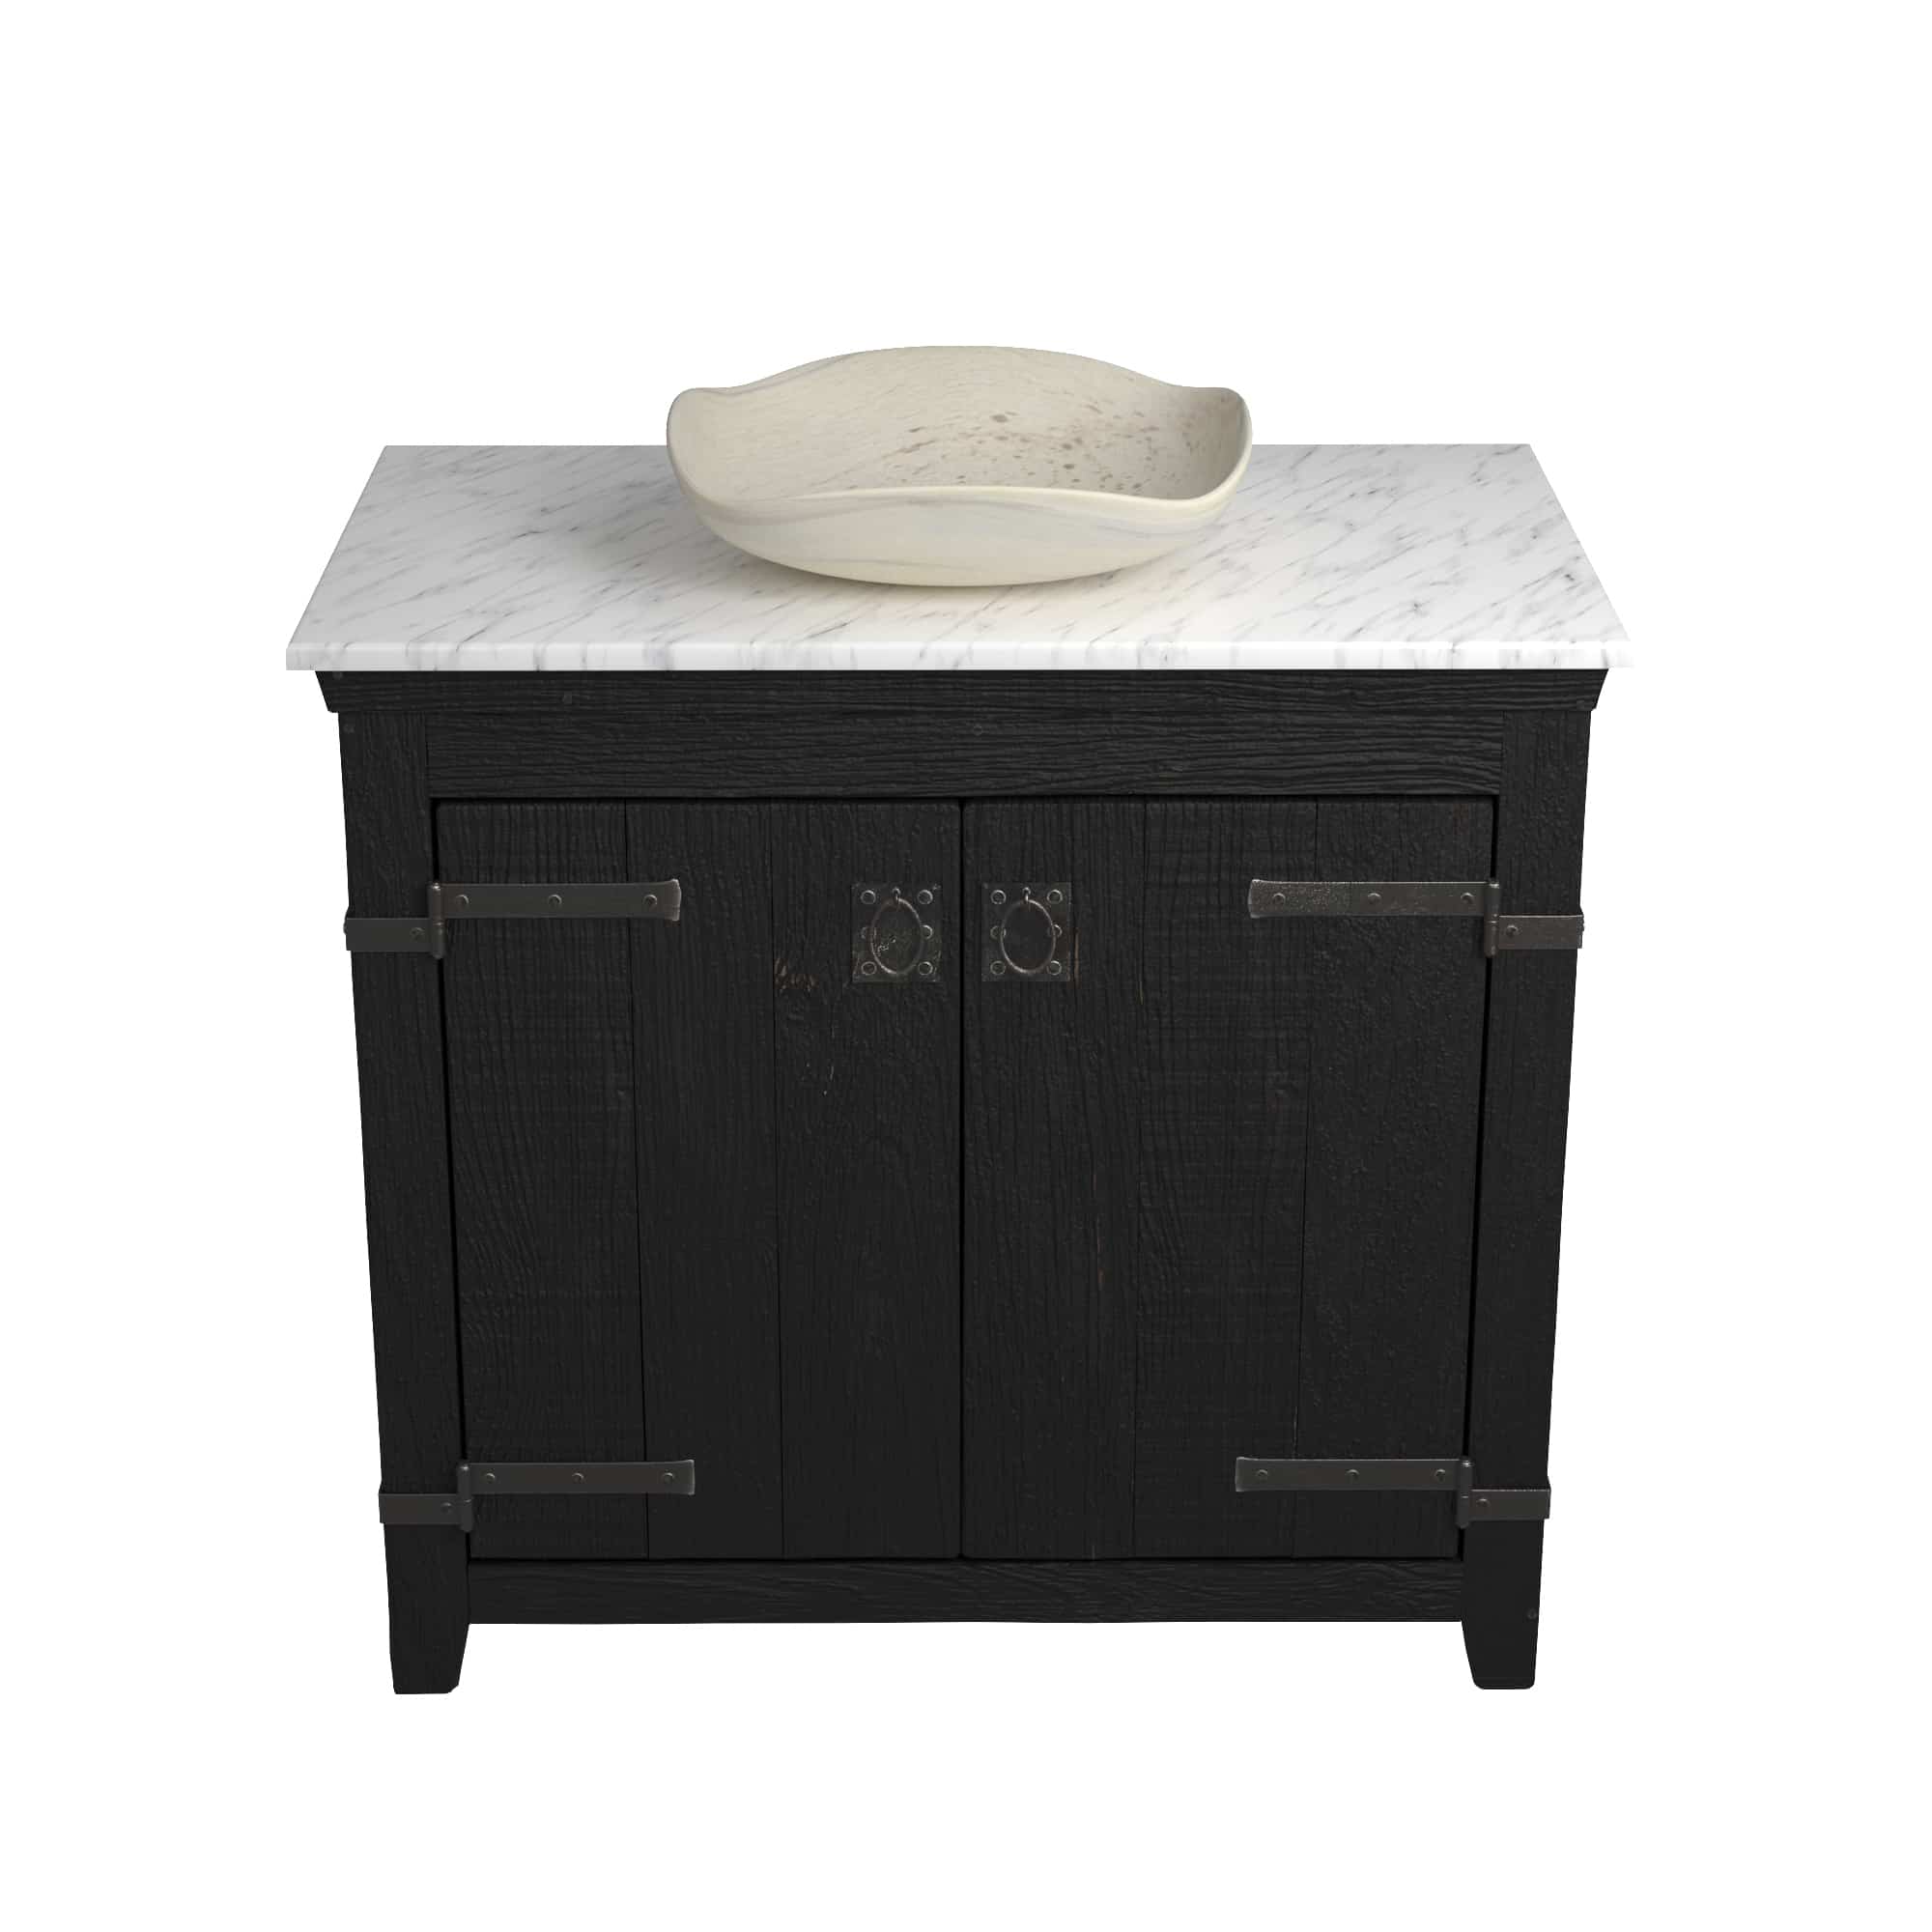 Native Trails 36" Americana Vanity in Anvil with Carrara Marble Top and Lido in Beachcomber, No Faucet Hole, BND36-VB-CT-MG-022